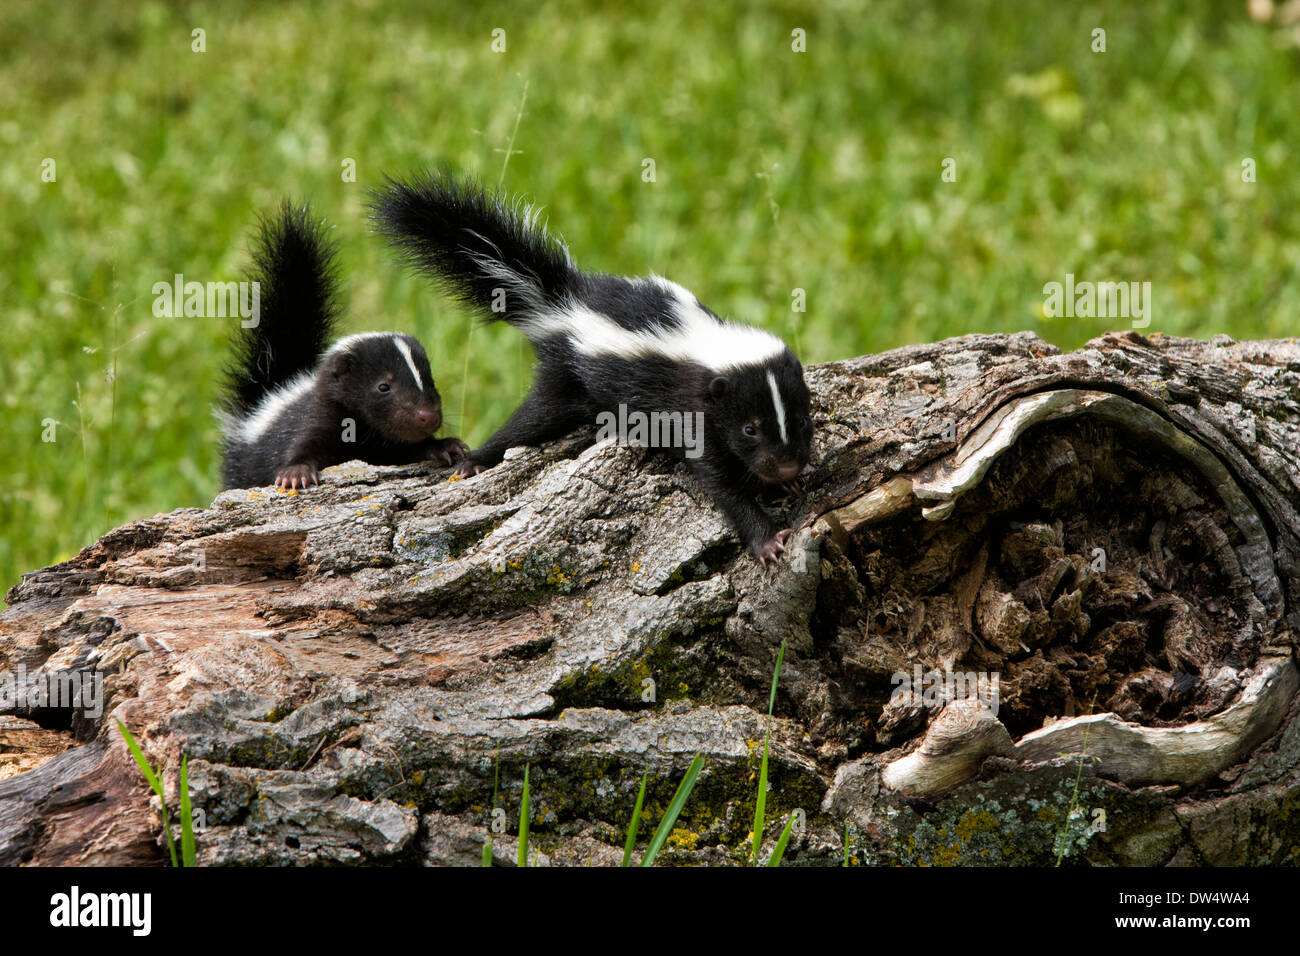 Baby skunks exploring together Stock Photo